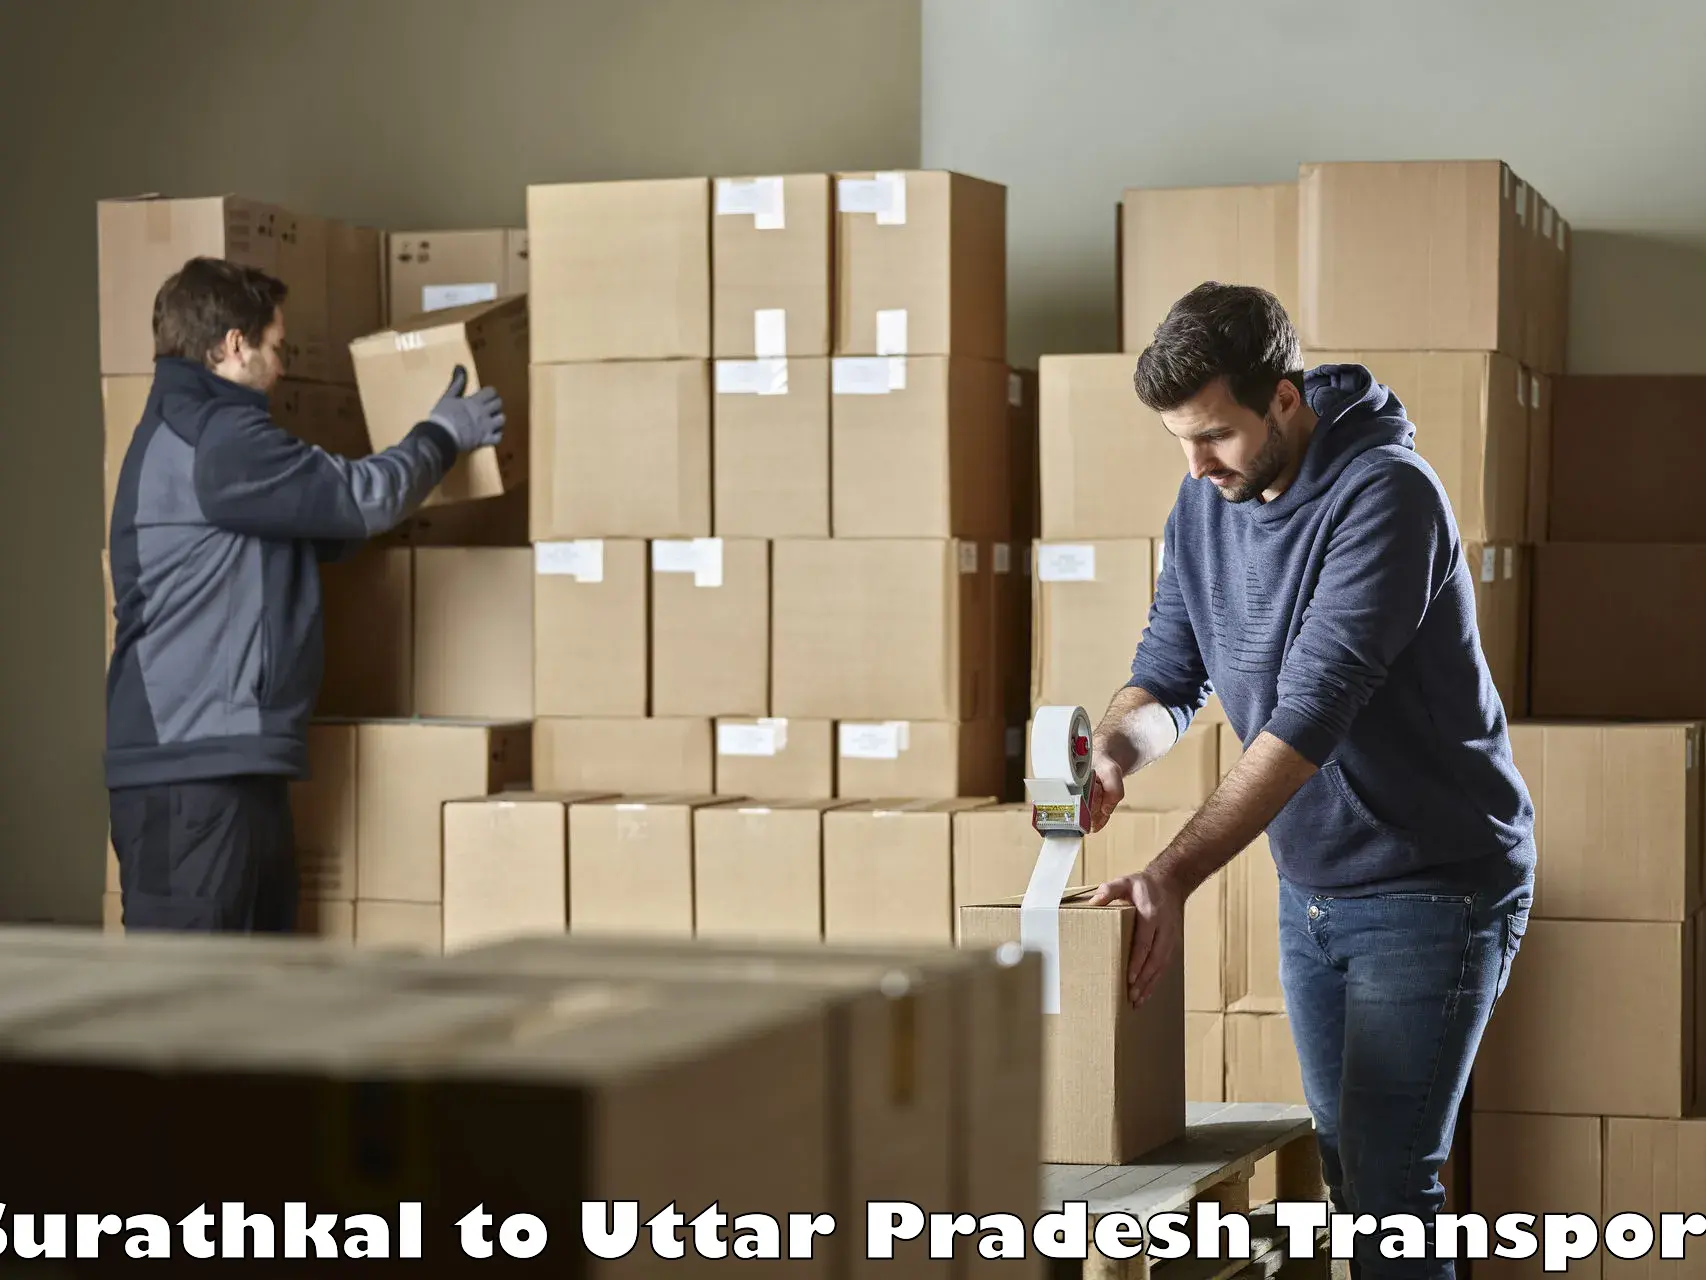 Daily parcel service transport Surathkal to Sultanpur Avadh